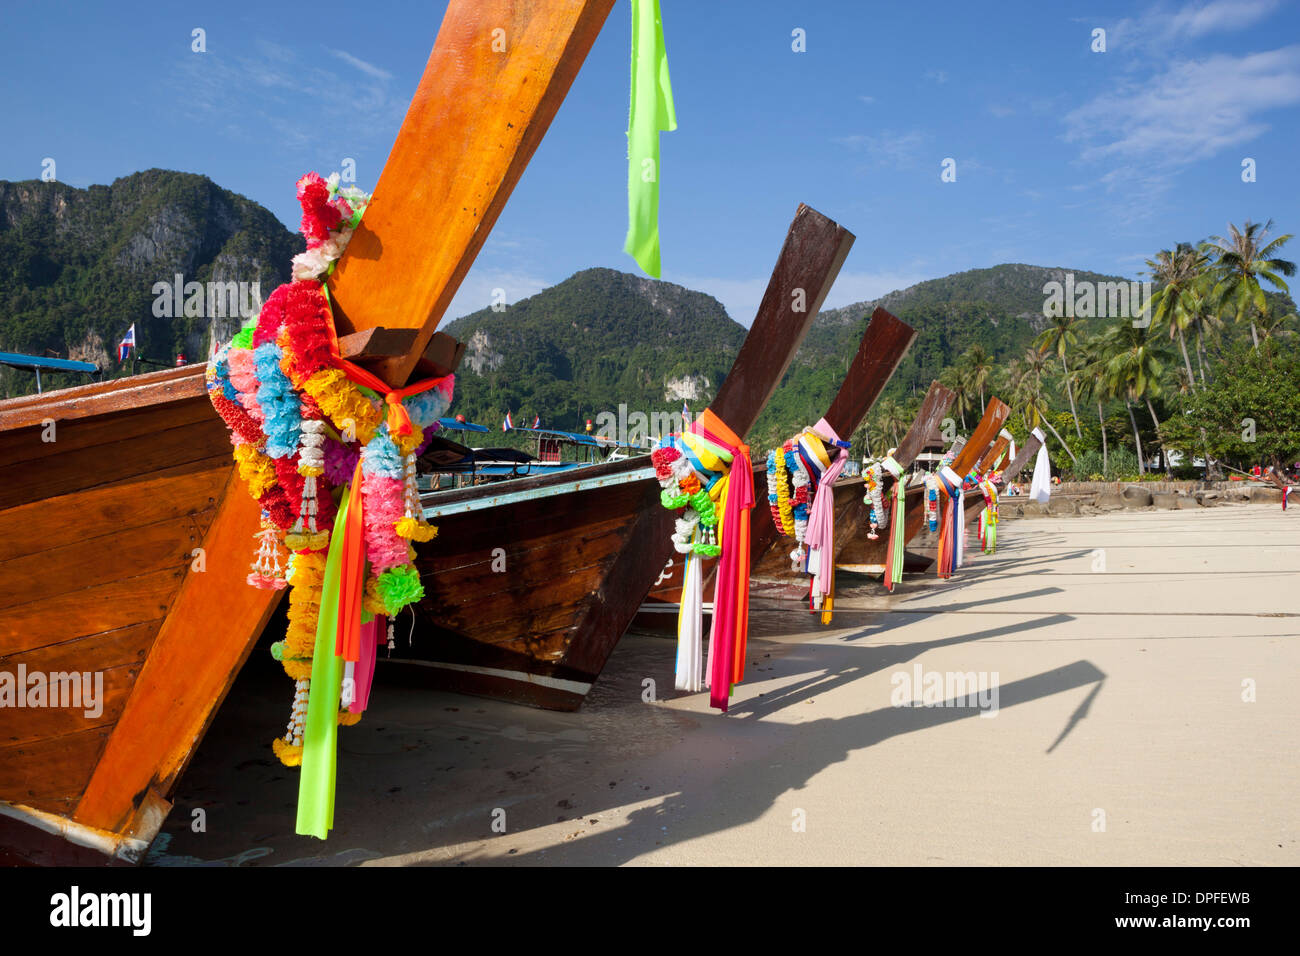 Garlands decorating long-tail boats on beach, Koh Phi Phi, Krabi Province, Thailand, Southeast Asia Stock Photo